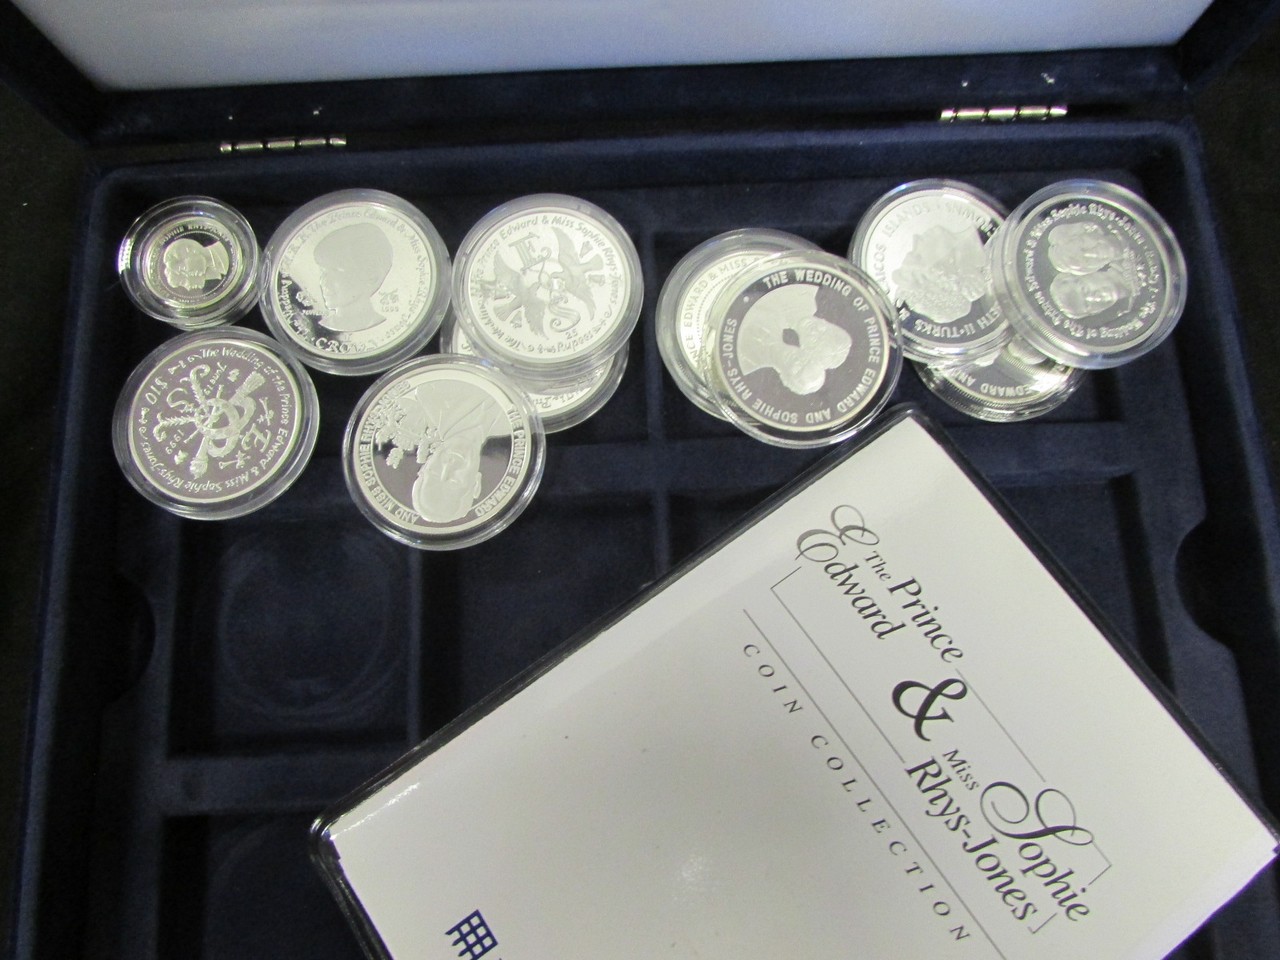 British Commonwealth Silver Proofs (18) 1990s, mostly crown-size related to the wedding of Prince